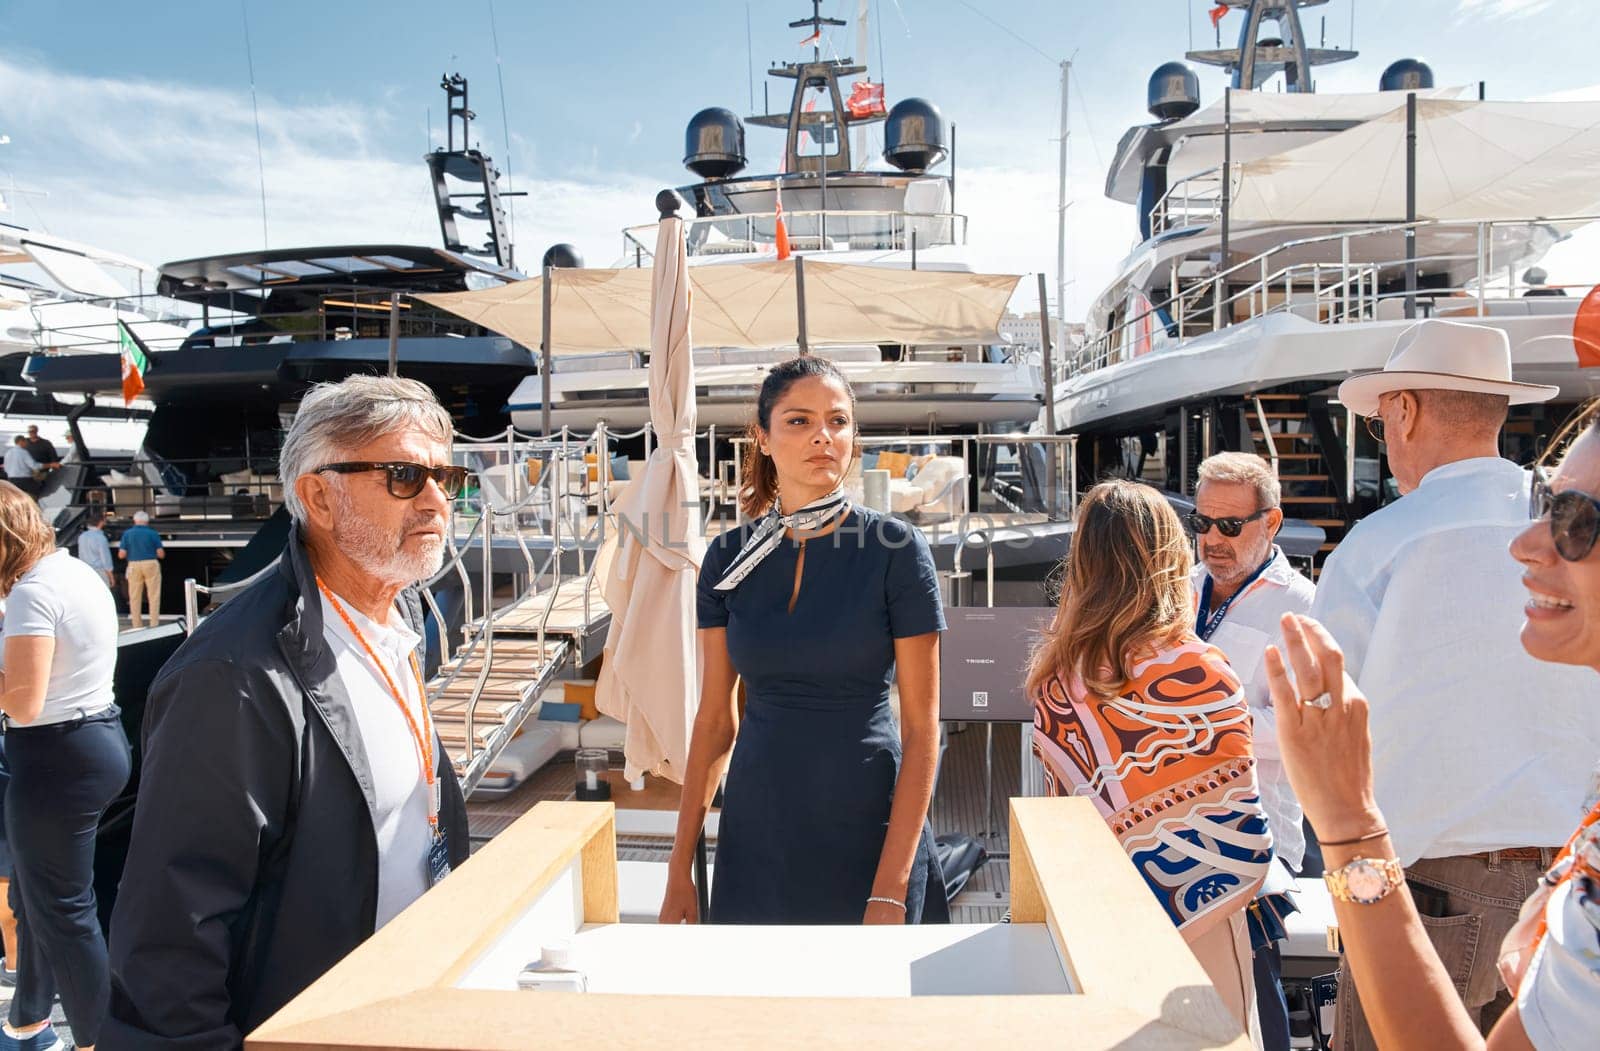 Monaco, Monte Carlo, 29 September 2022 - clients and yacht brokers look at the mega yachts presented, discuss the novelties of the boating industry at the famous motorboat exhibition. High quality photo